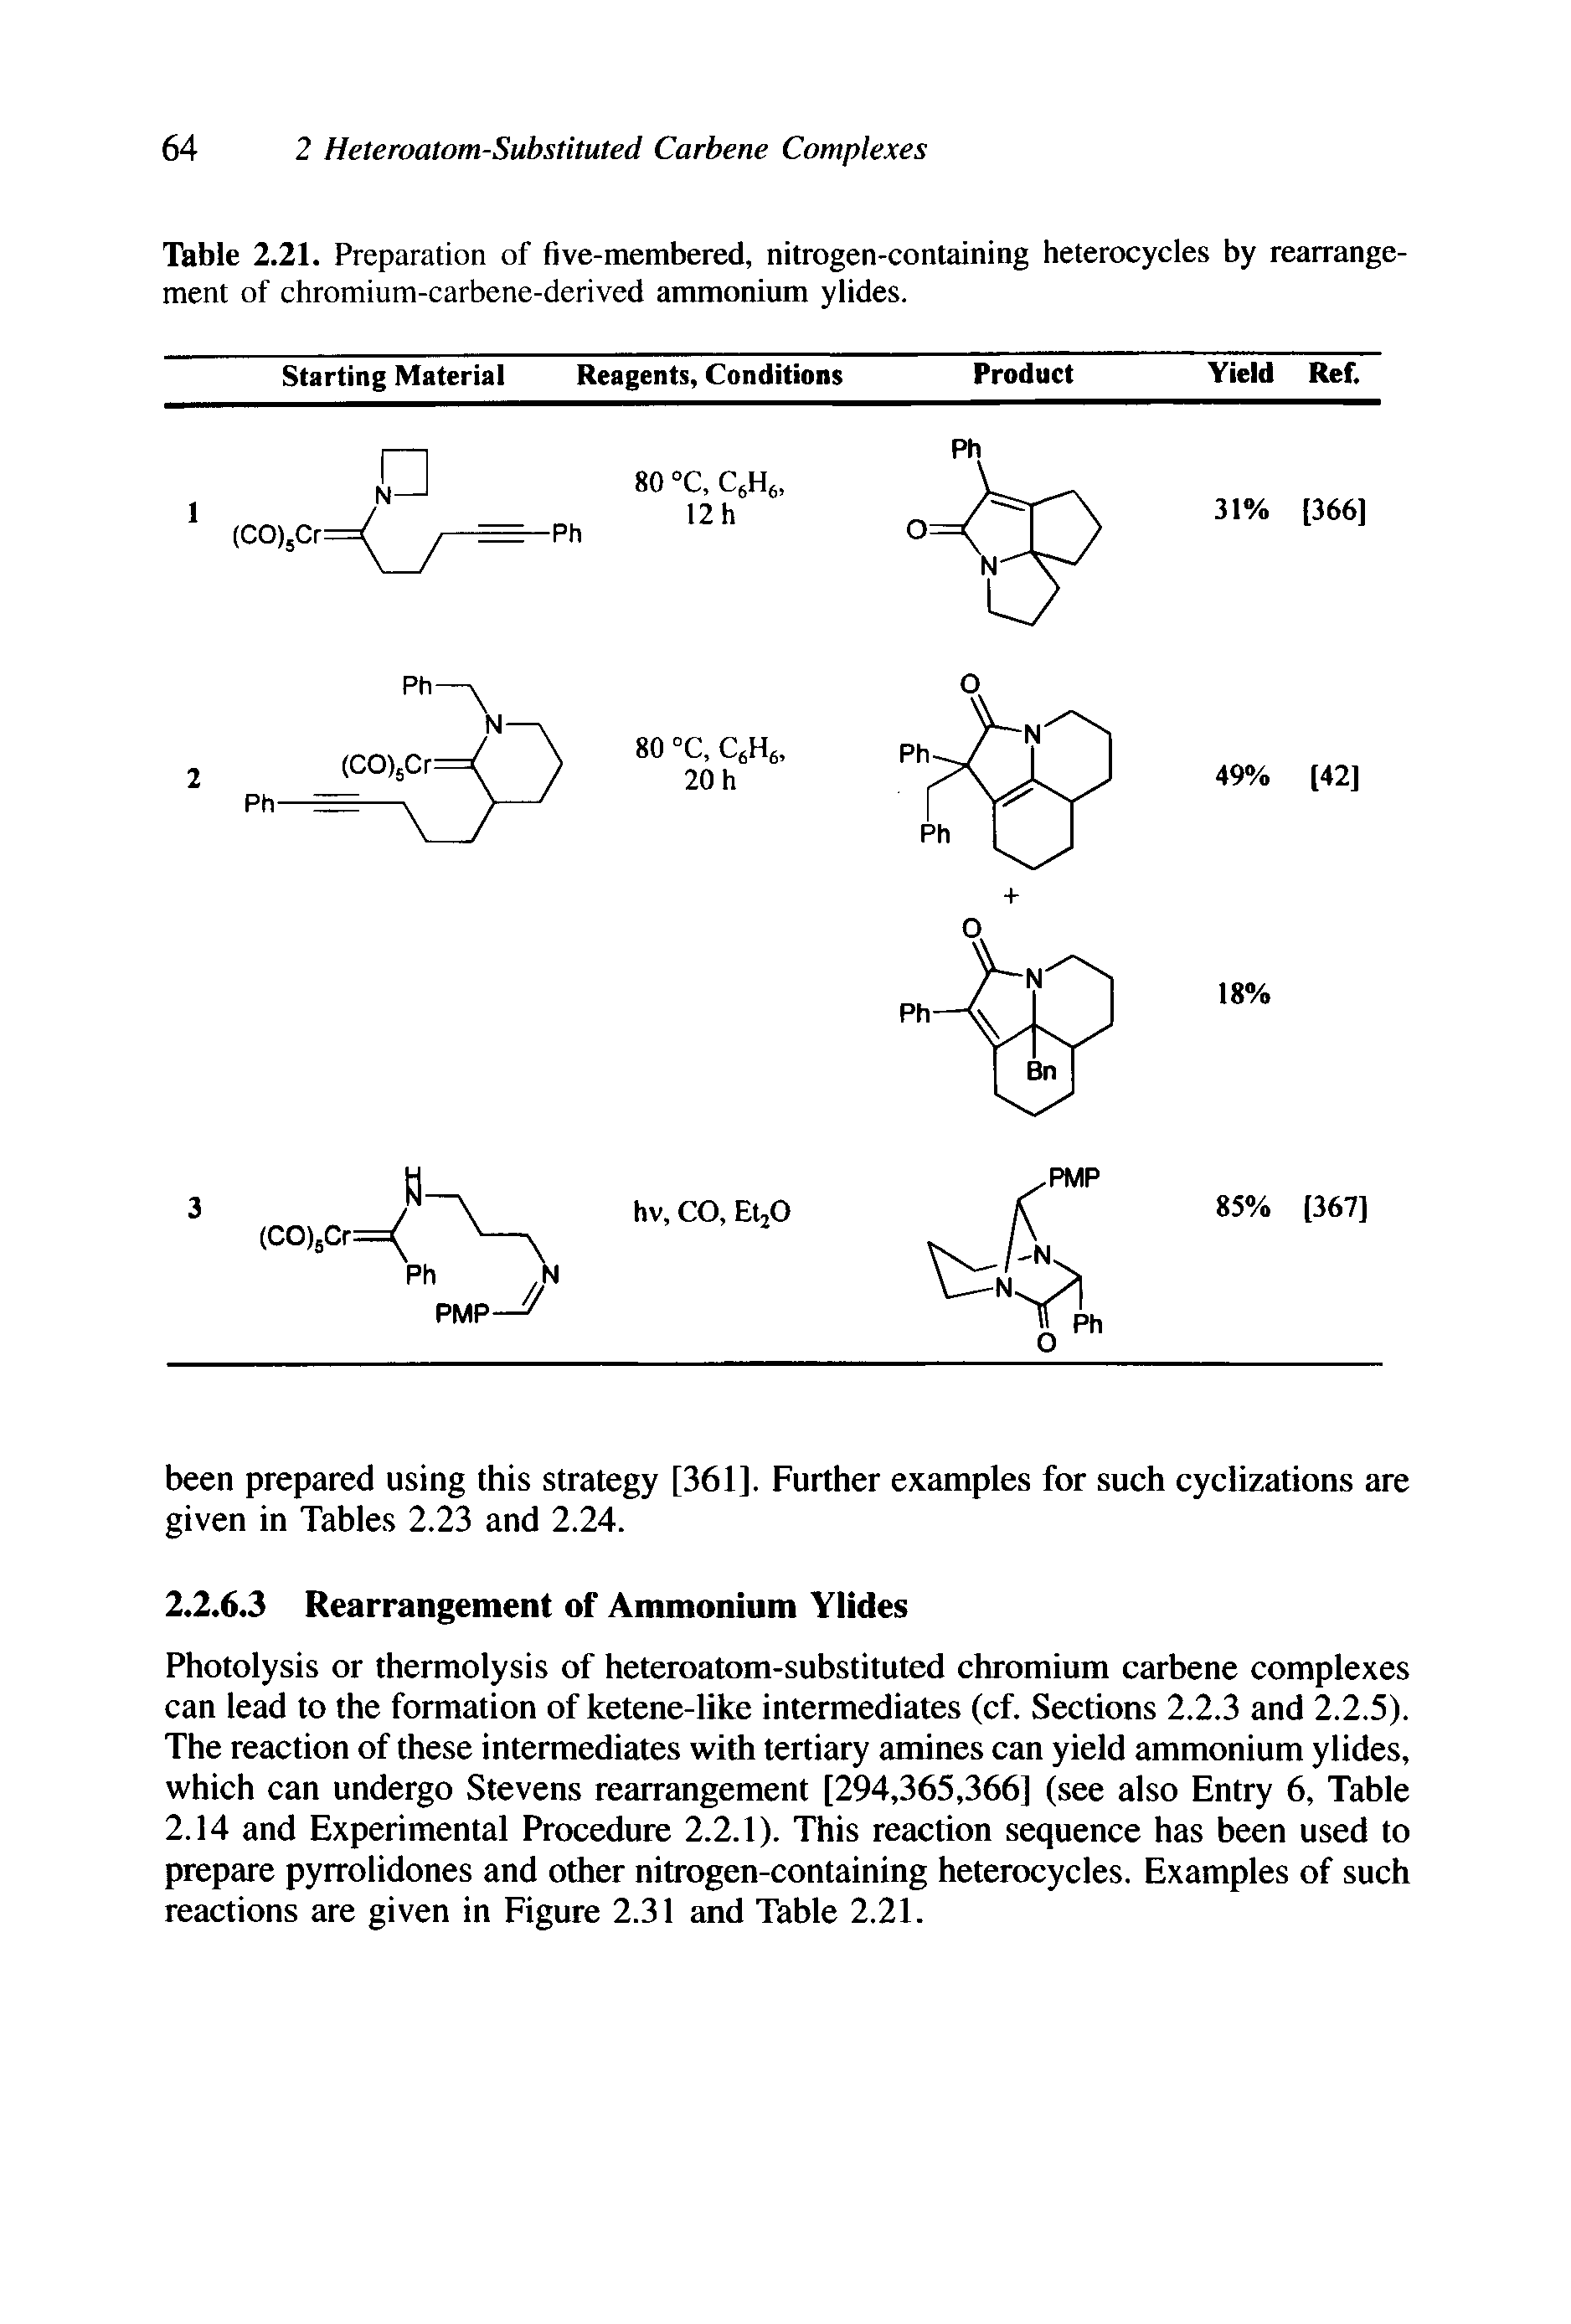 Table 2.21. Preparation of five-membered, nitrogen-containing heterocycles by rearrangement of chromium-carbene-derived ammonium ylides.